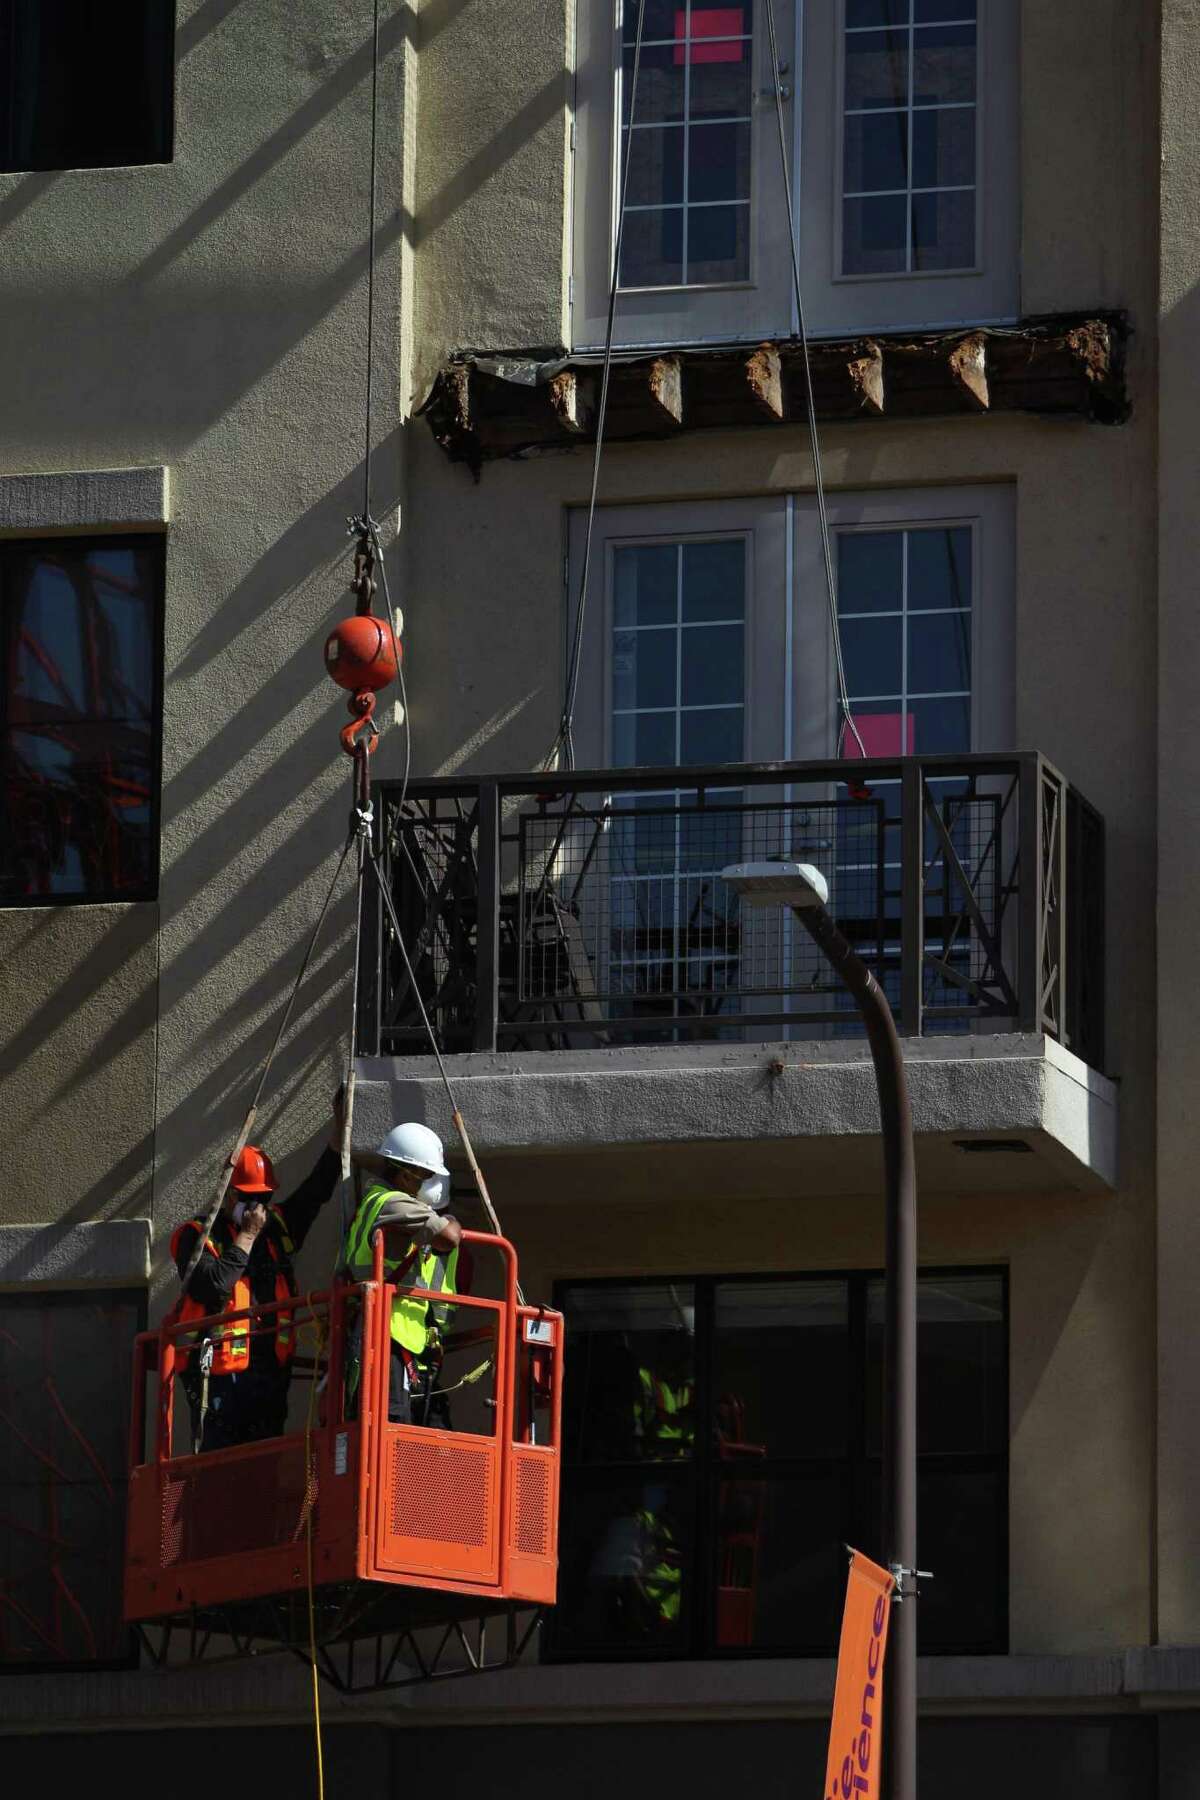 A balcony below the one that collapsed is worked on at 2020 Kittredge St. in Berkeley, California, on Tuesday, June 16, 2015.